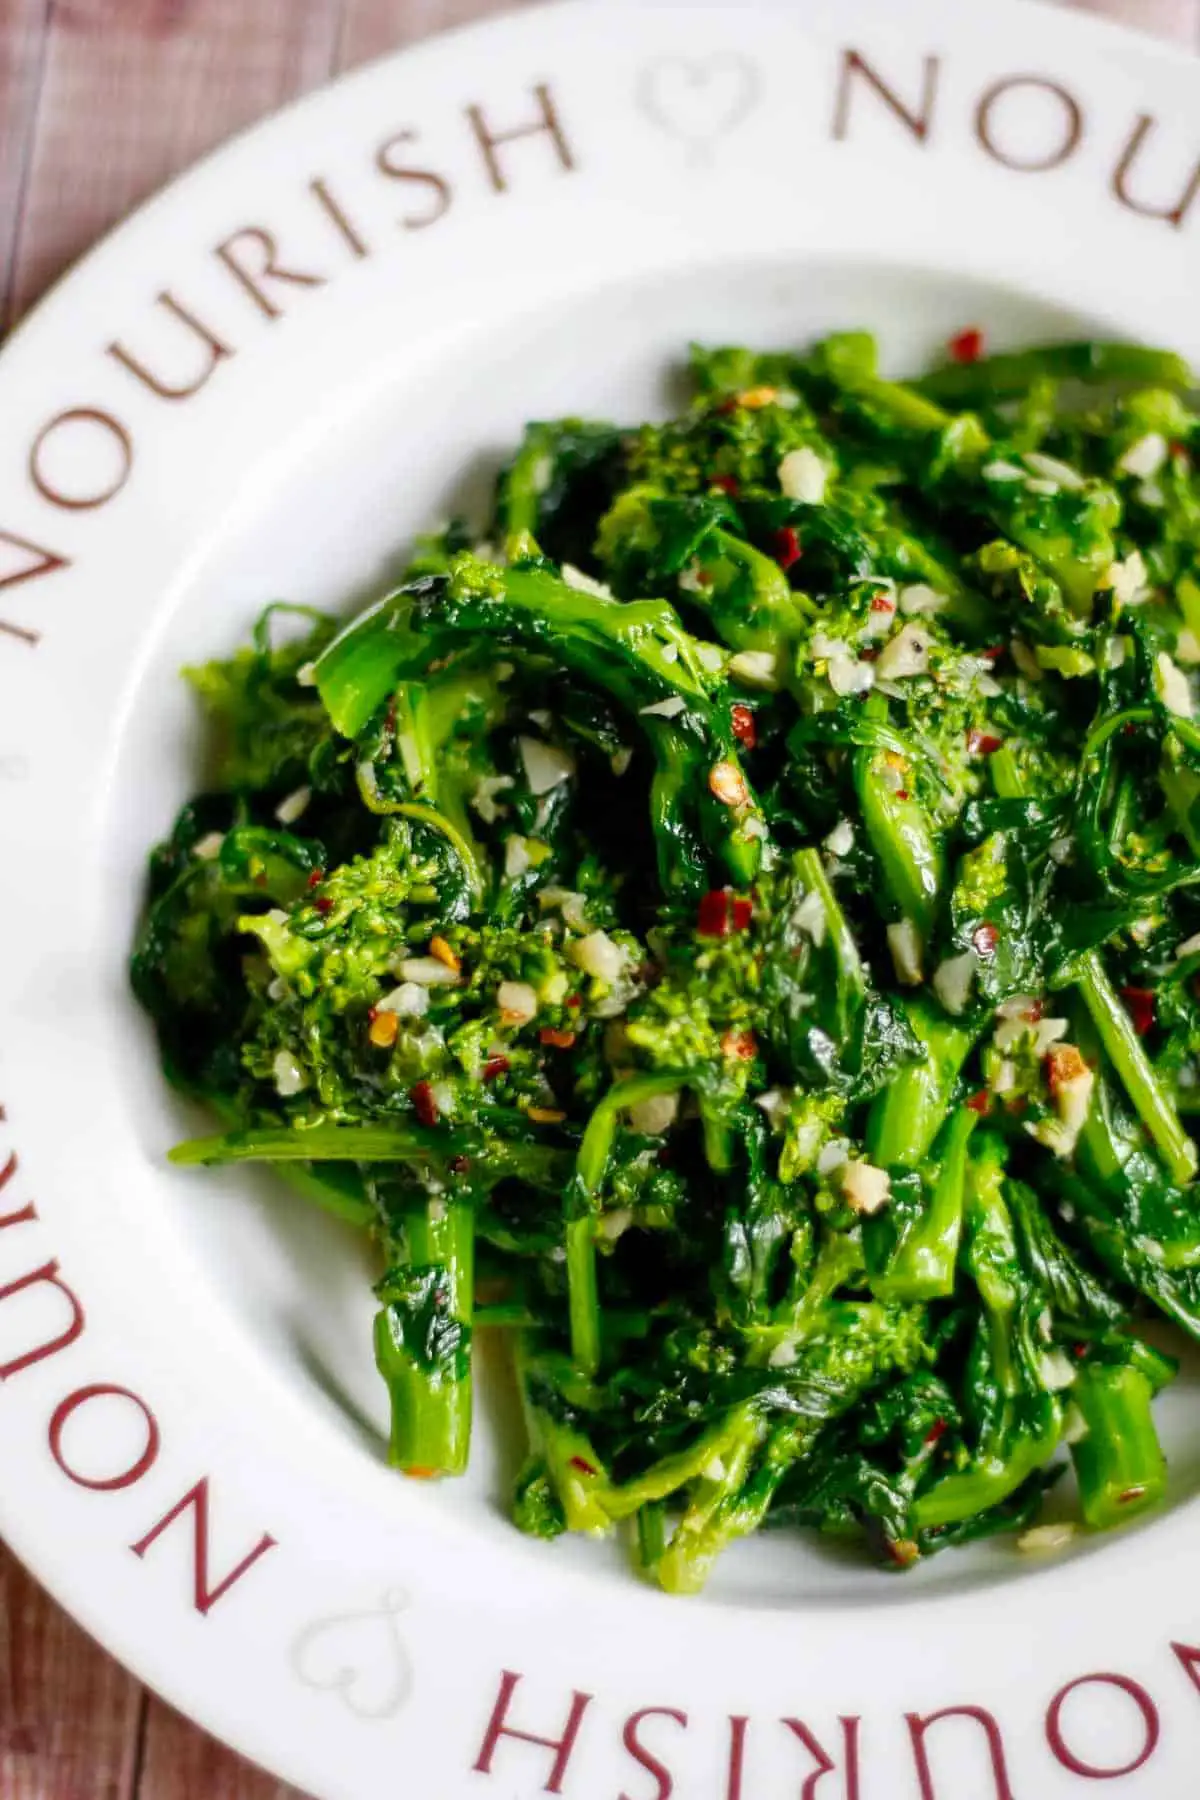 Sautéed broccoli rabe also known as rapini in a dish with the word "Nourish" repeated on the rim of the dish.